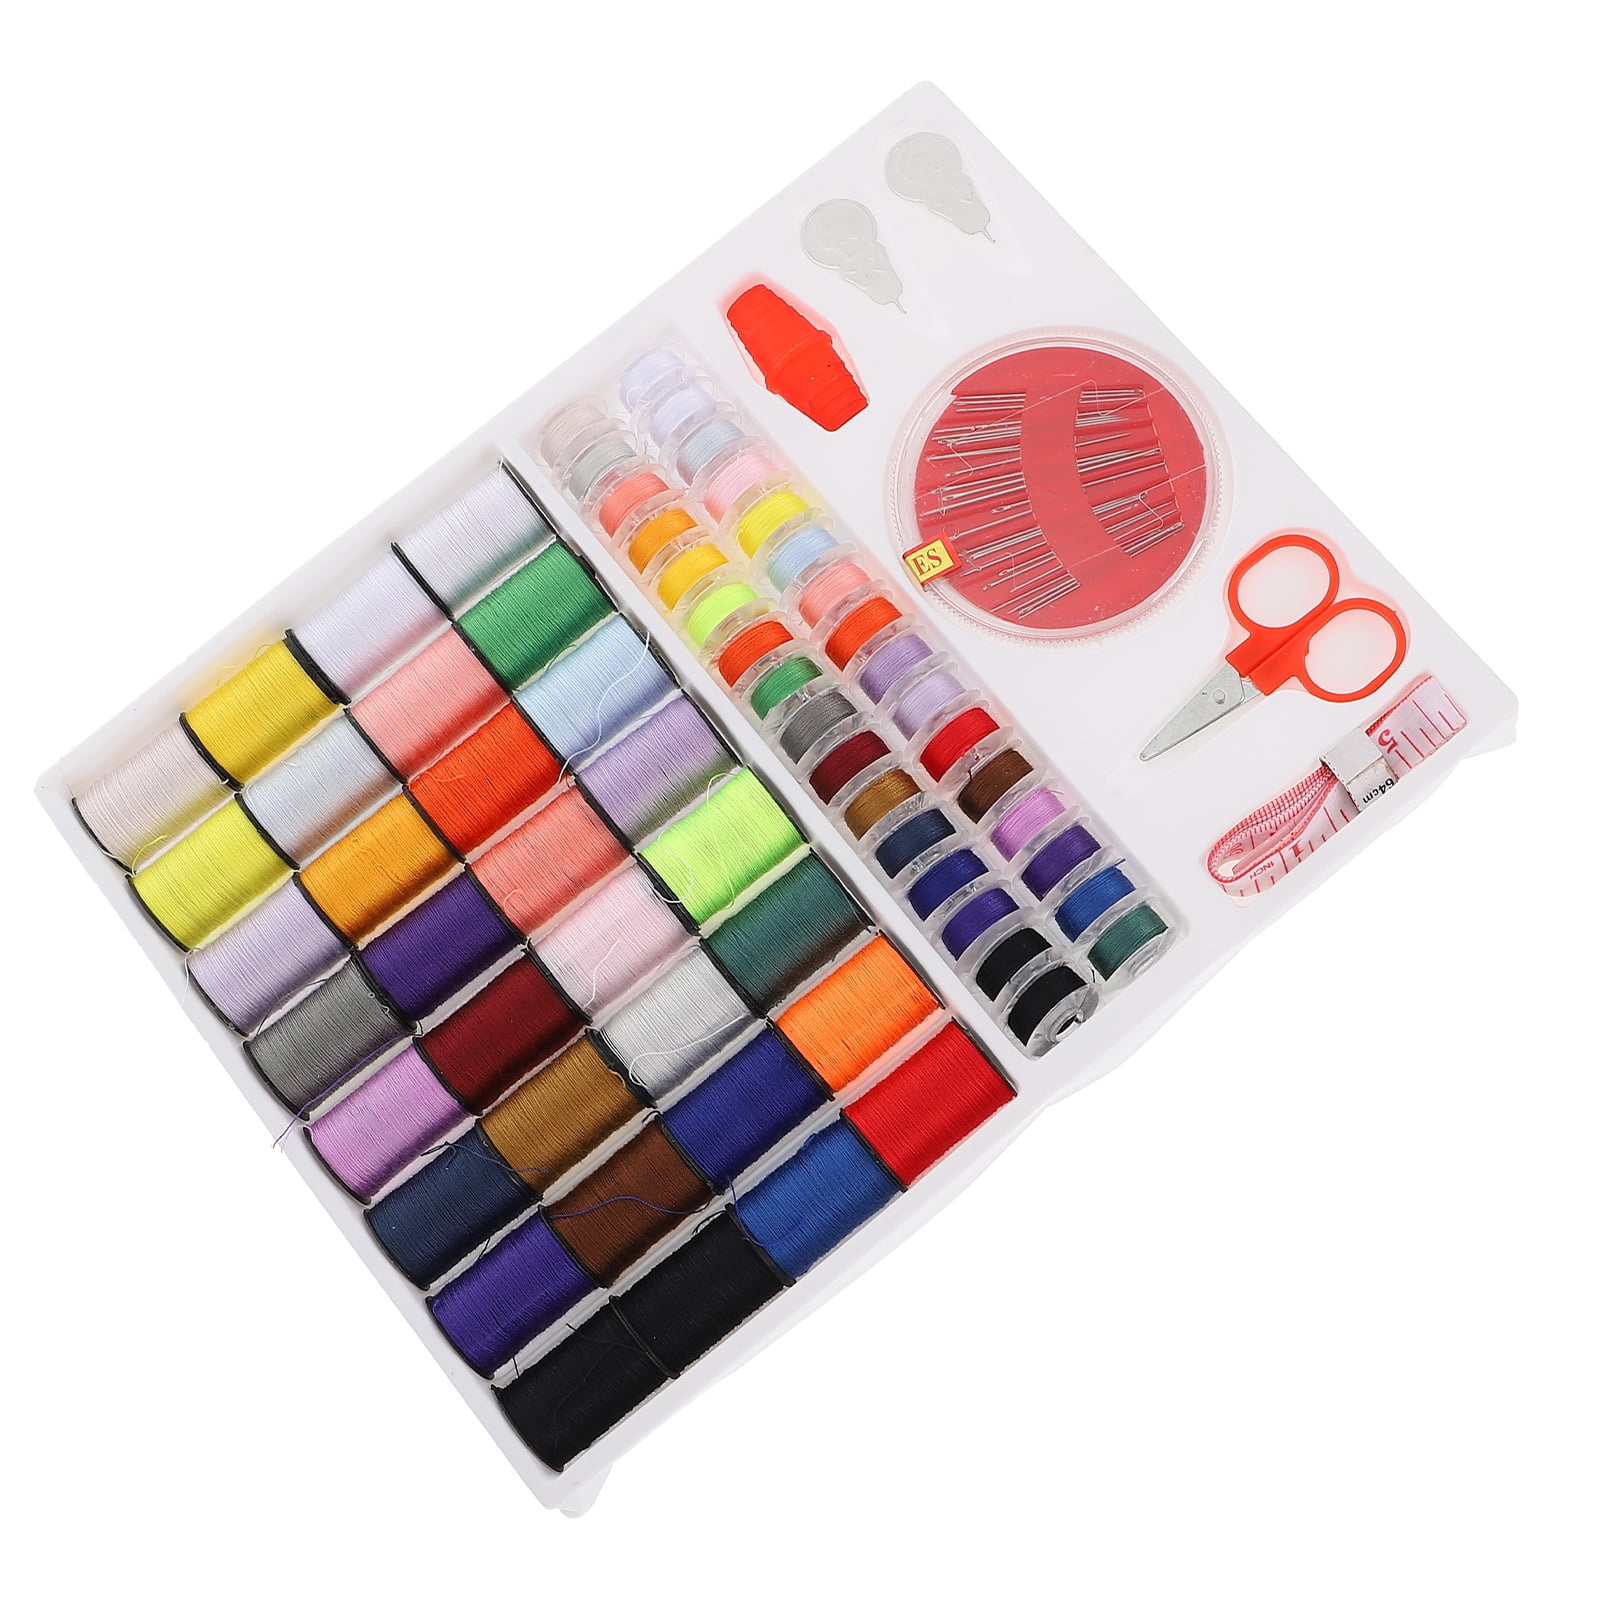 Embroidery Floss 218pcs Embroidery Thread String Kits with